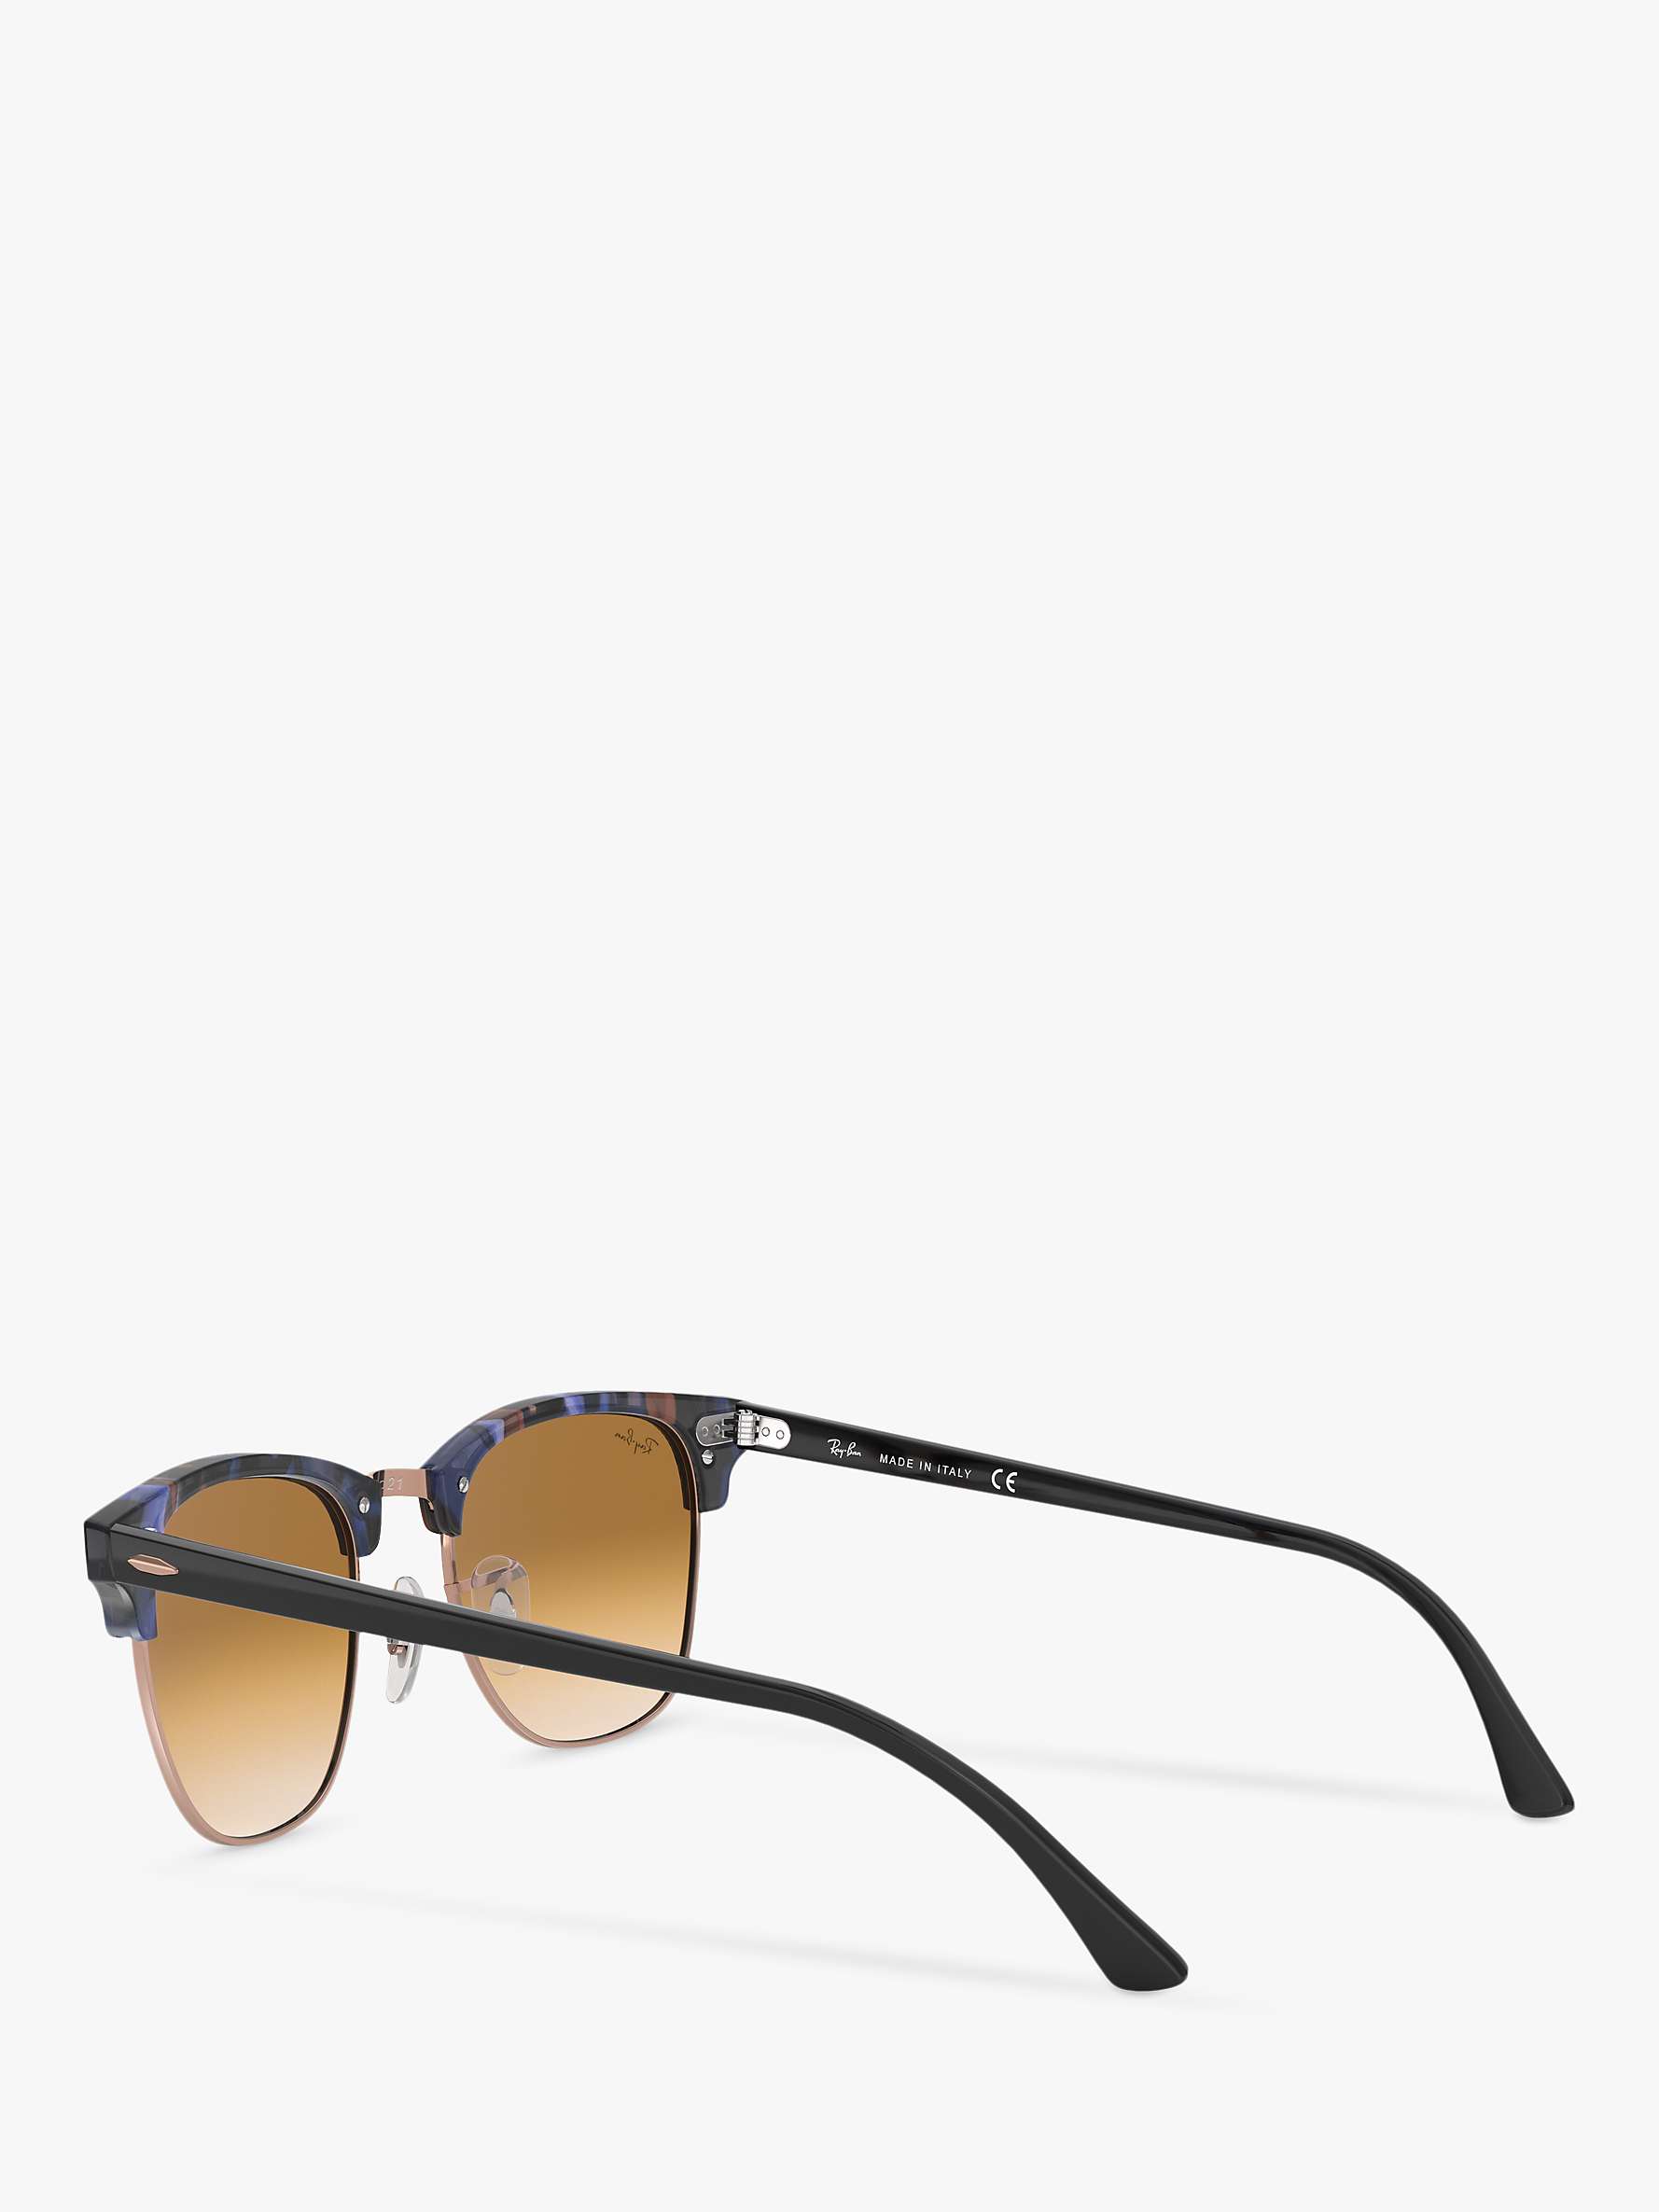 Buy Ray-Ban RB3016 Men's Classic Clubmaster Sunglasses, Spotted Blue/Brown Gradient Online at johnlewis.com